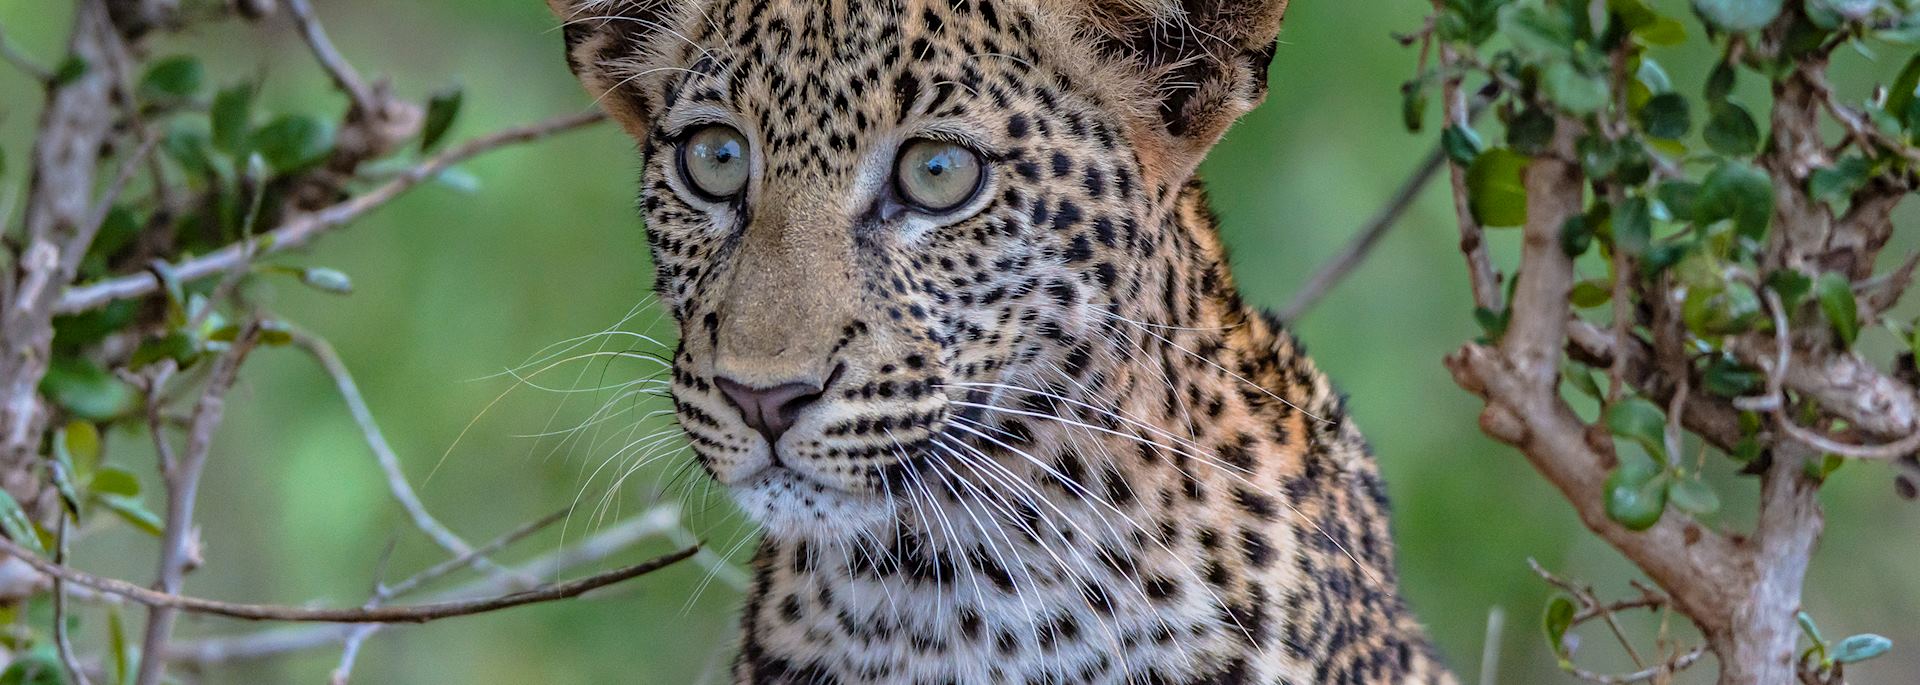 Young leopard in Tsavo East National Park